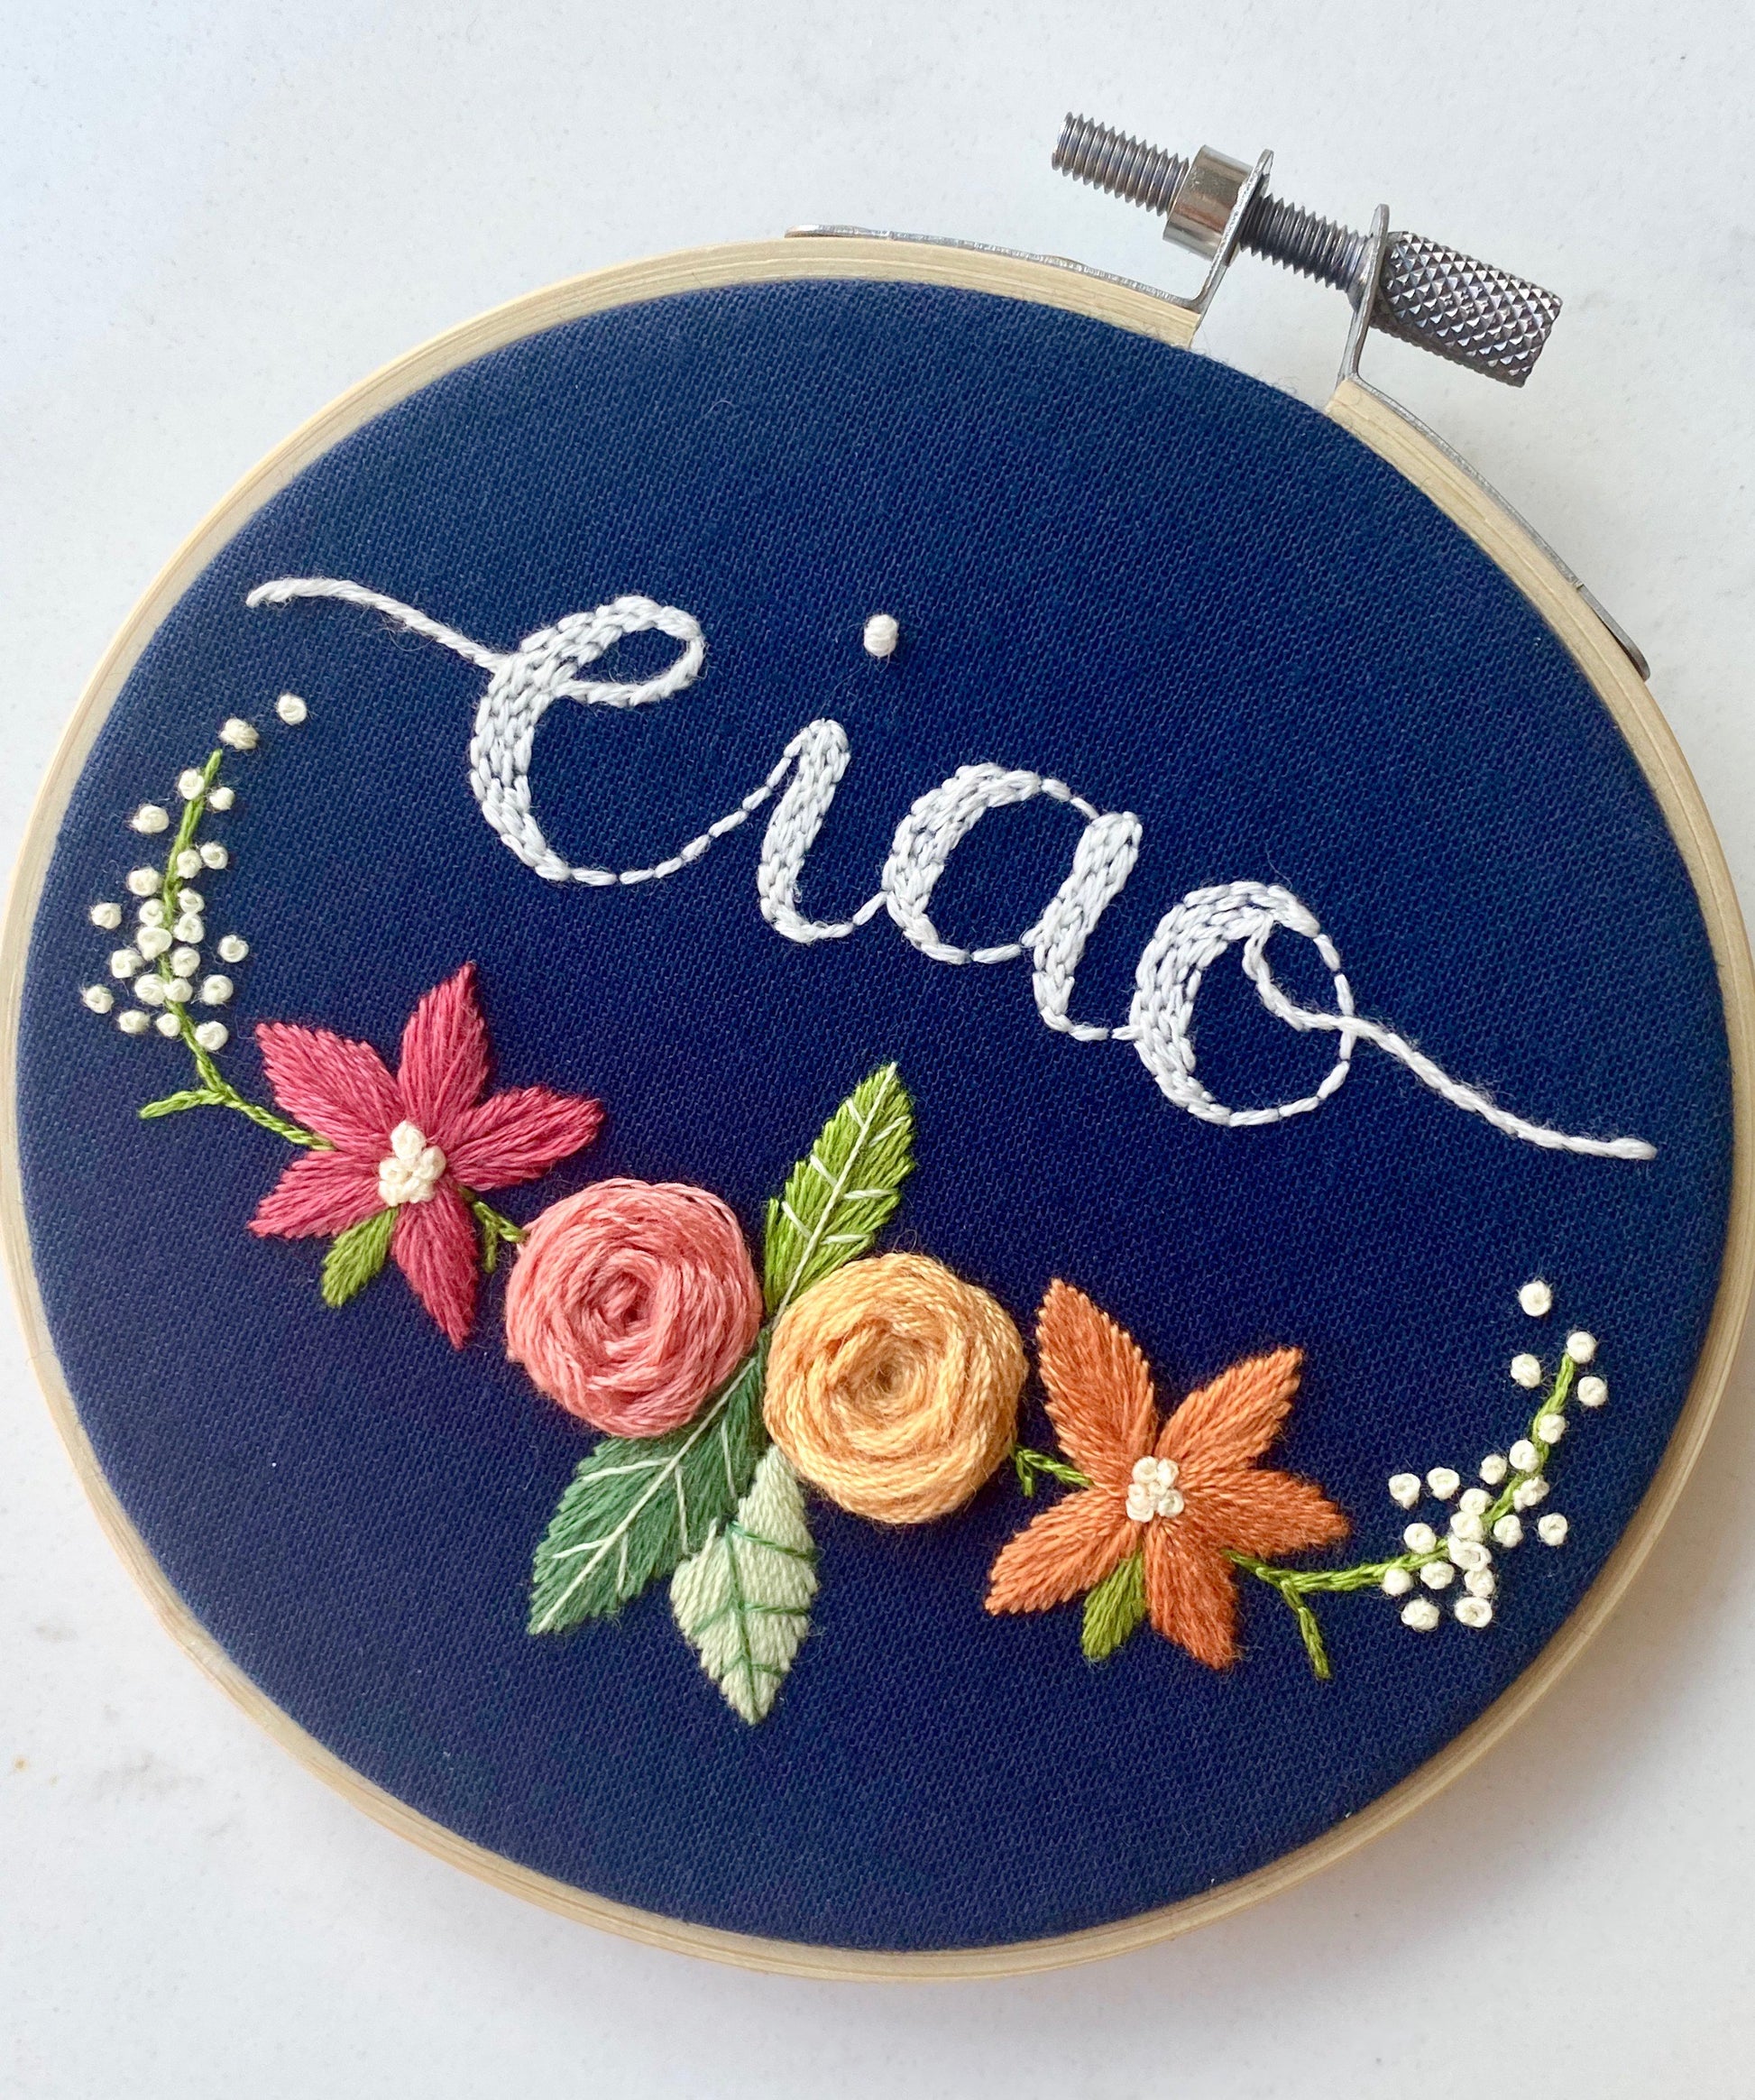 Ciao Embroidery Hoop